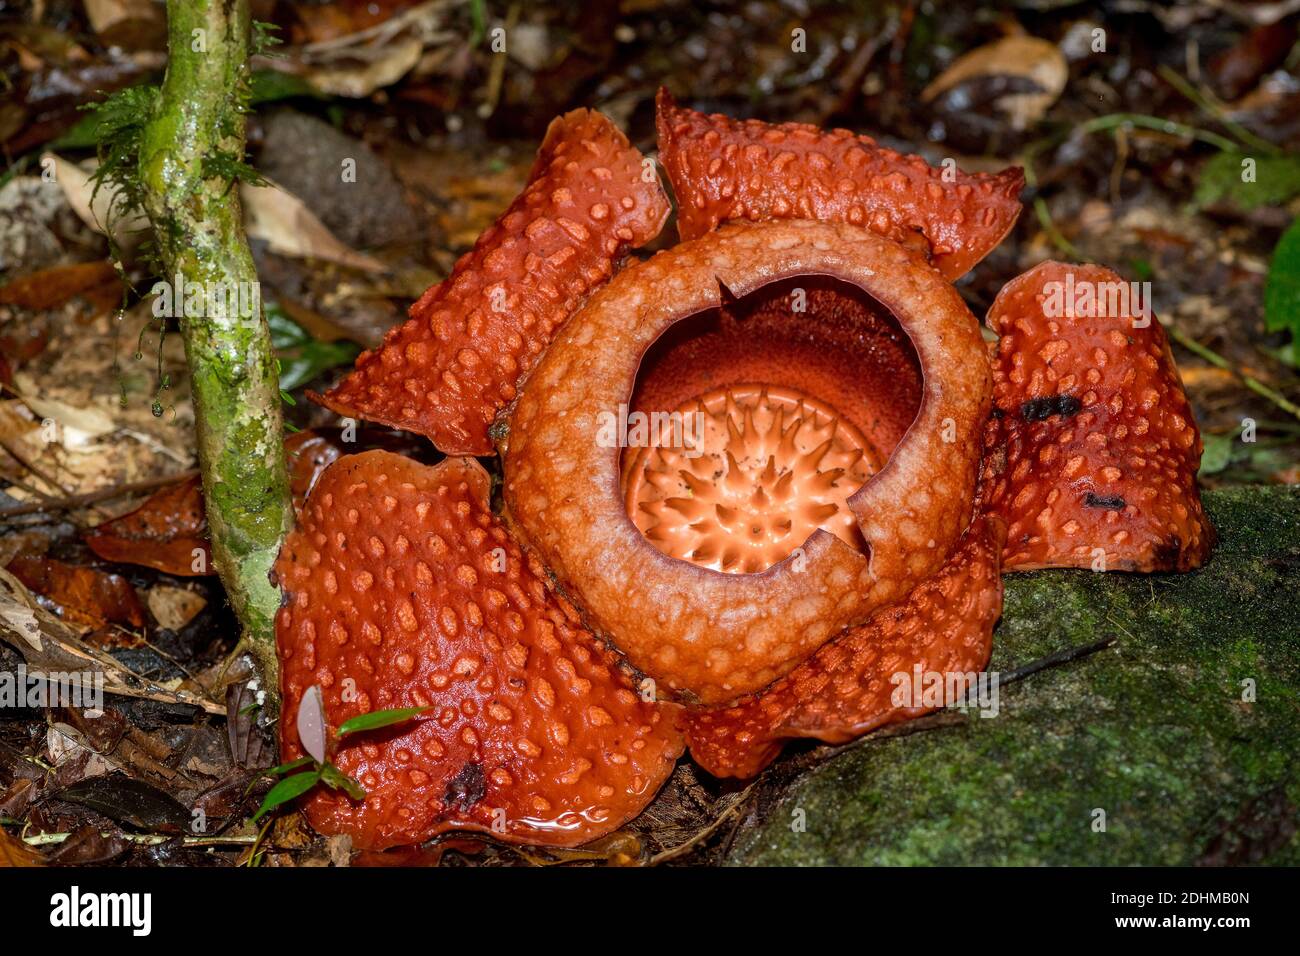 Giant flower of the parasitic Rafflesia tuan-mudae in Gundung Gading National Park, Sarawak, Borneo.  The flower is about 50 cm in diameter on its thi Stock Photo